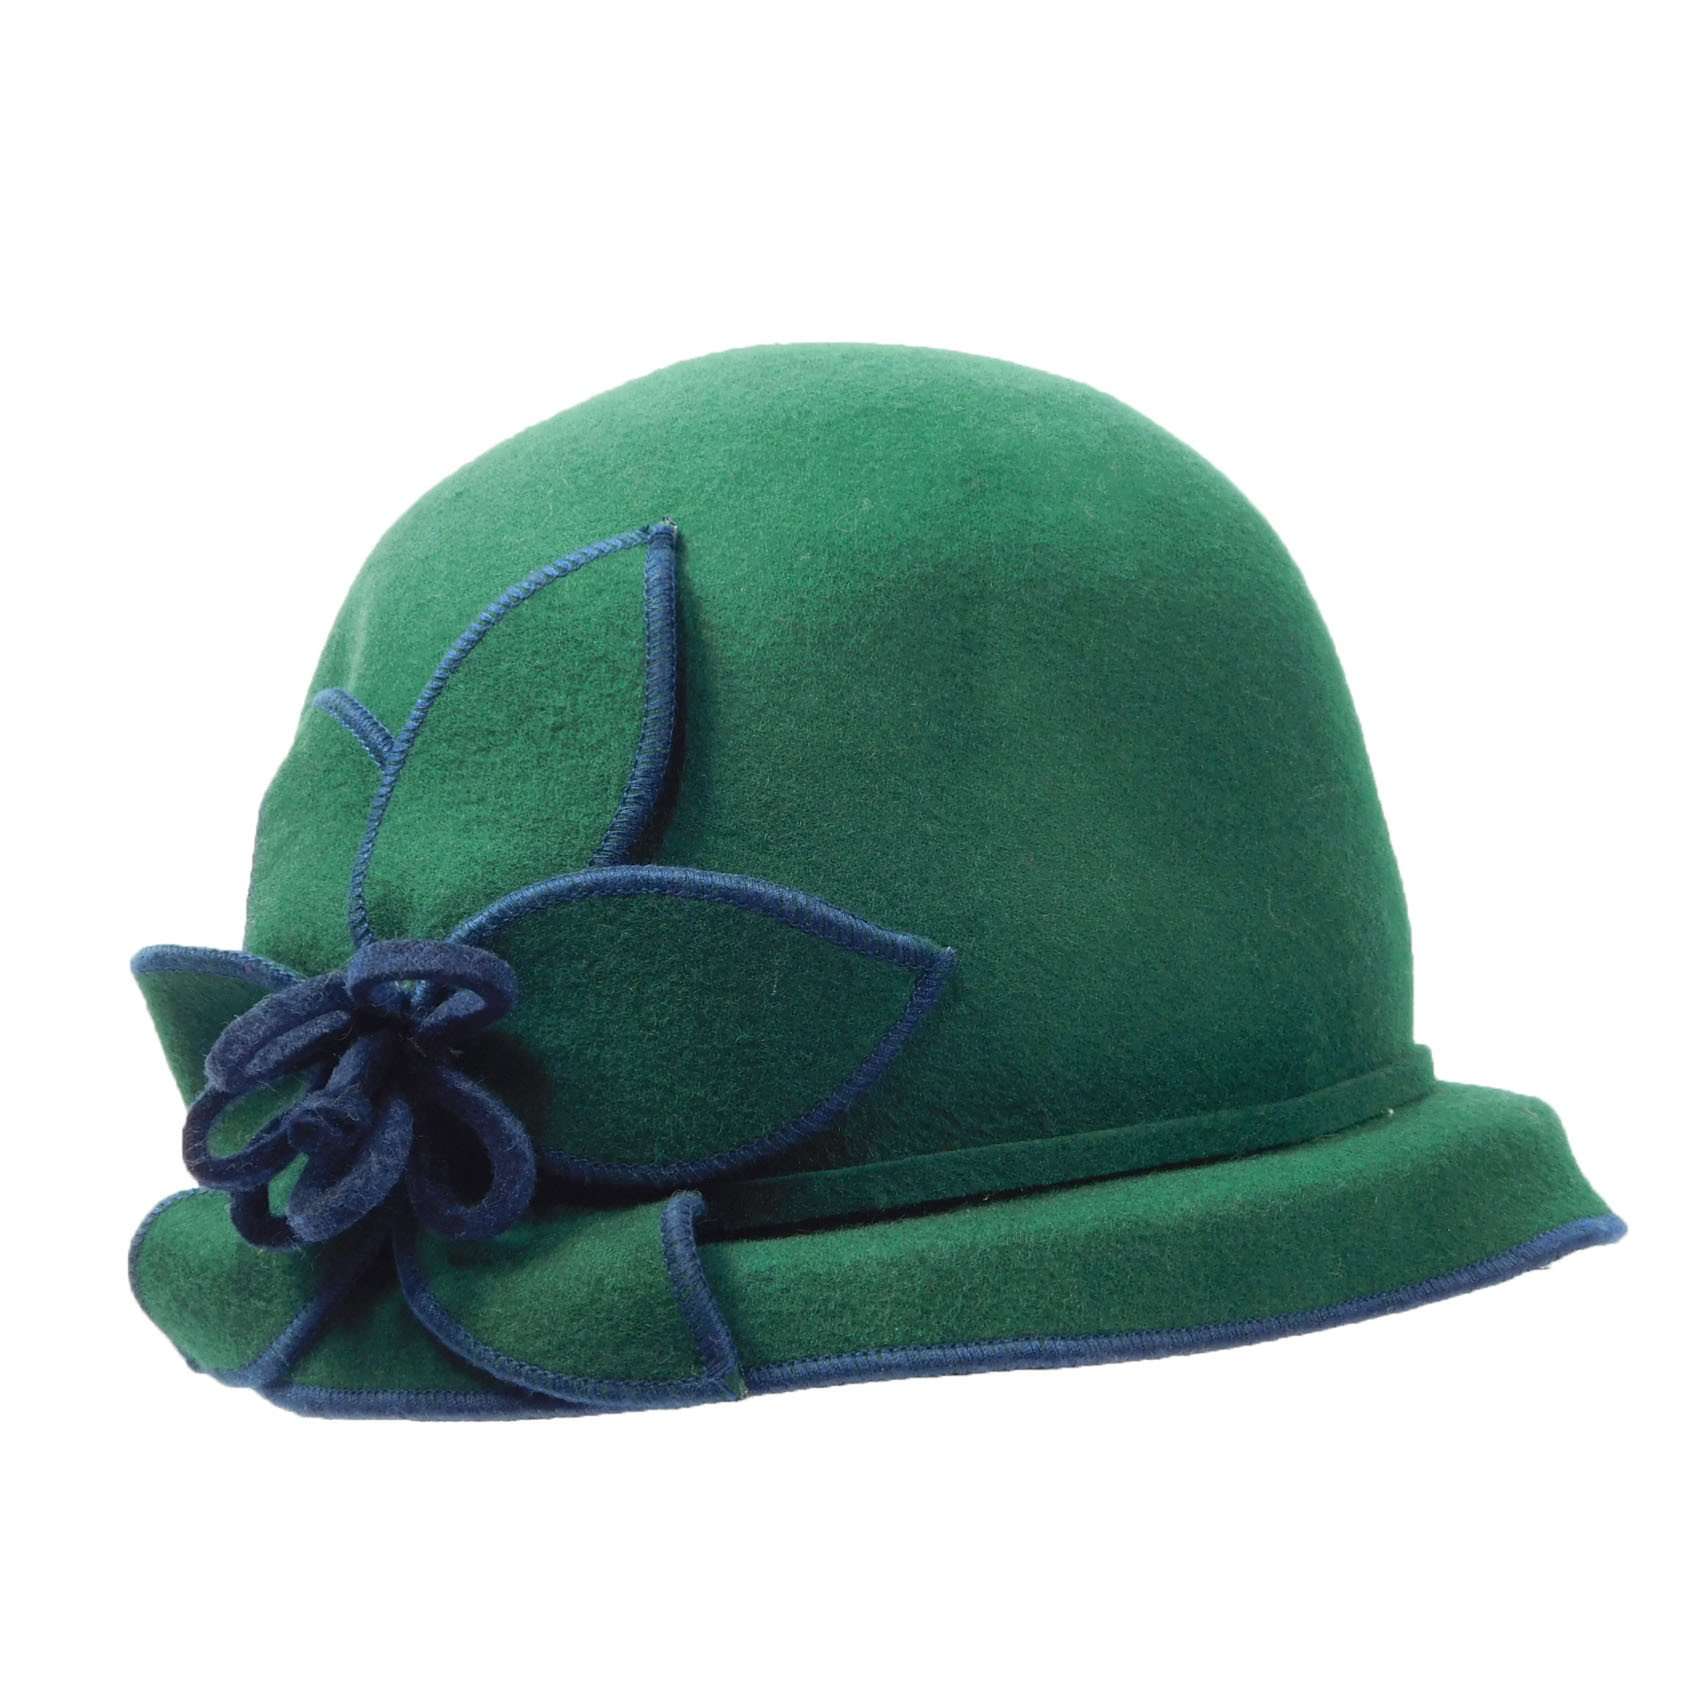 Structured Brim Cloche with Big Flower Accent Cloche Jeanne Simmons    